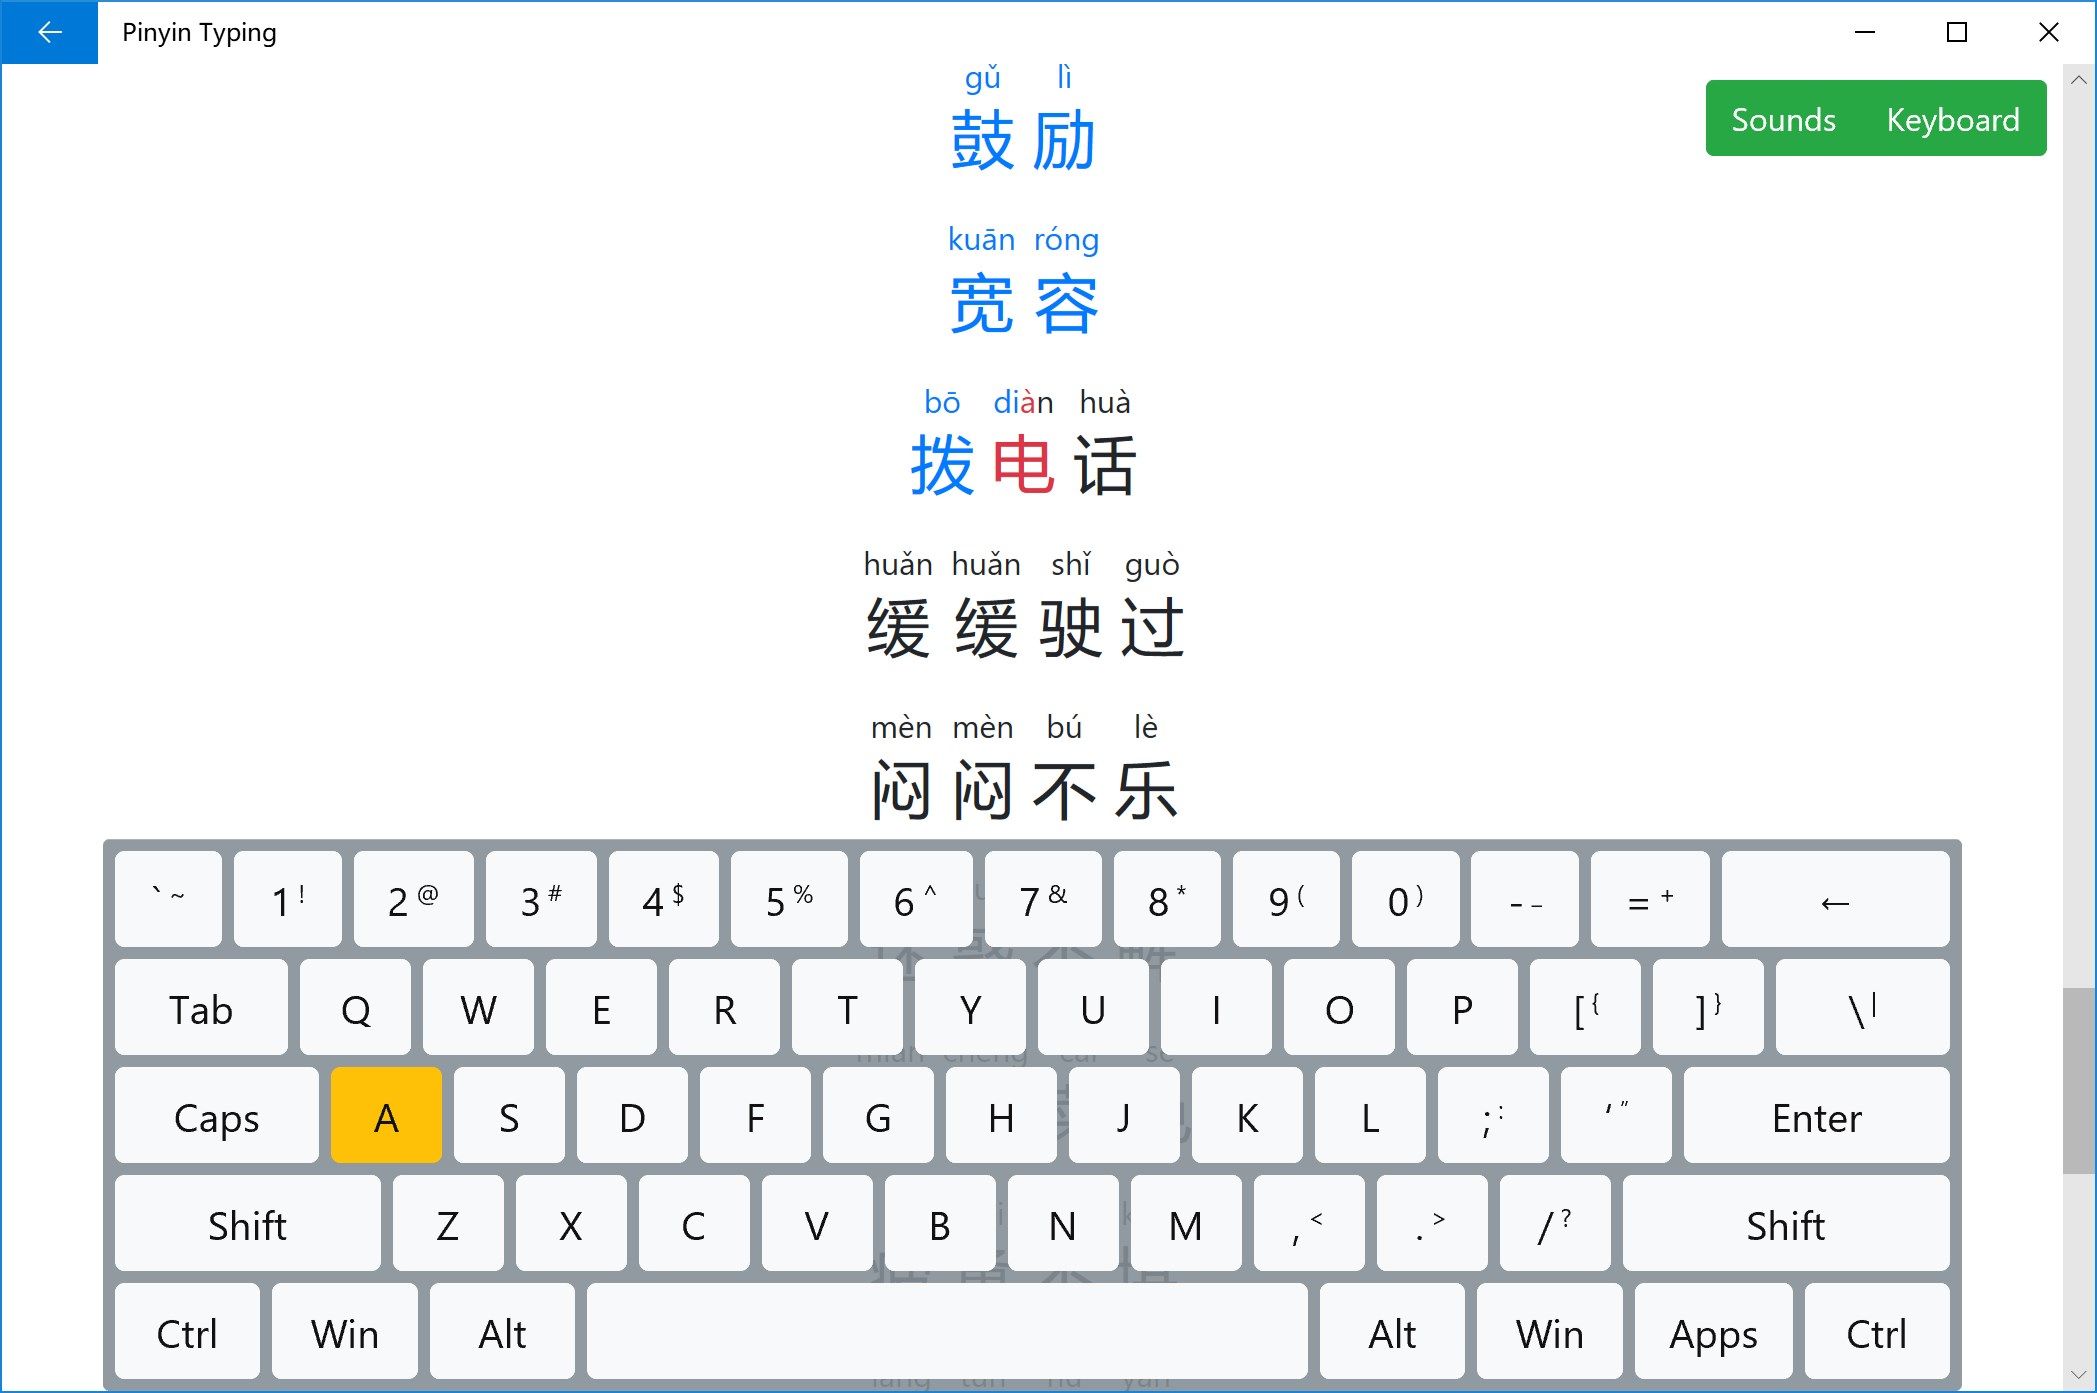 Typing pinyin for Chinese words